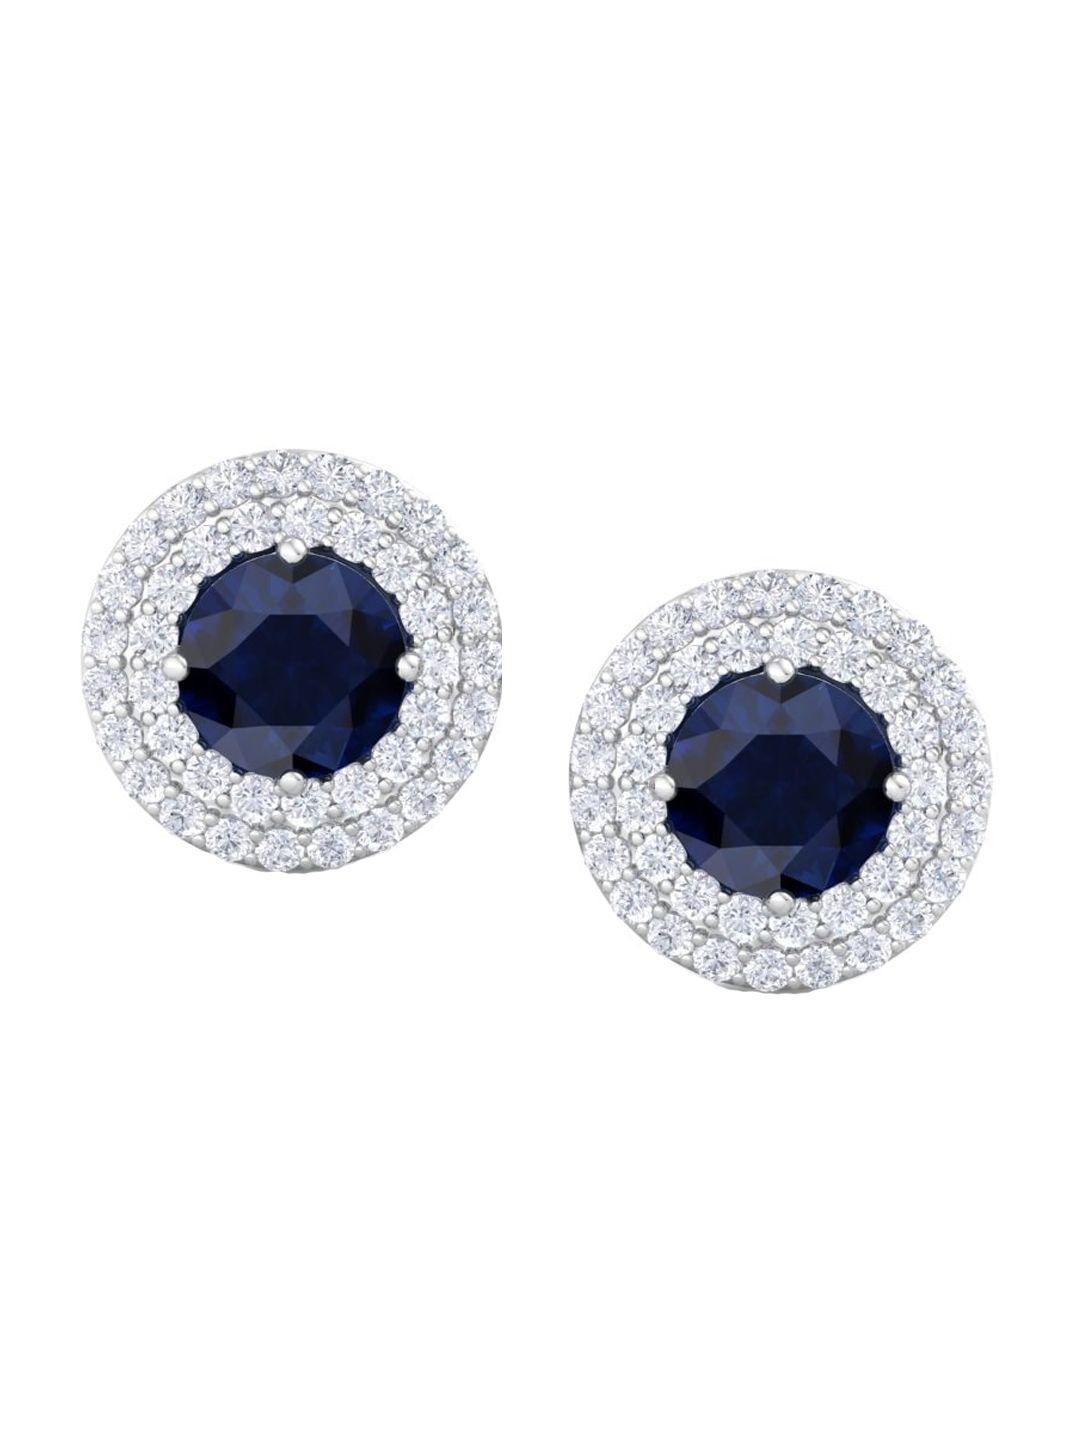 inddus jewels 925 sterling silver rhodium-plated cz studded studs earrings